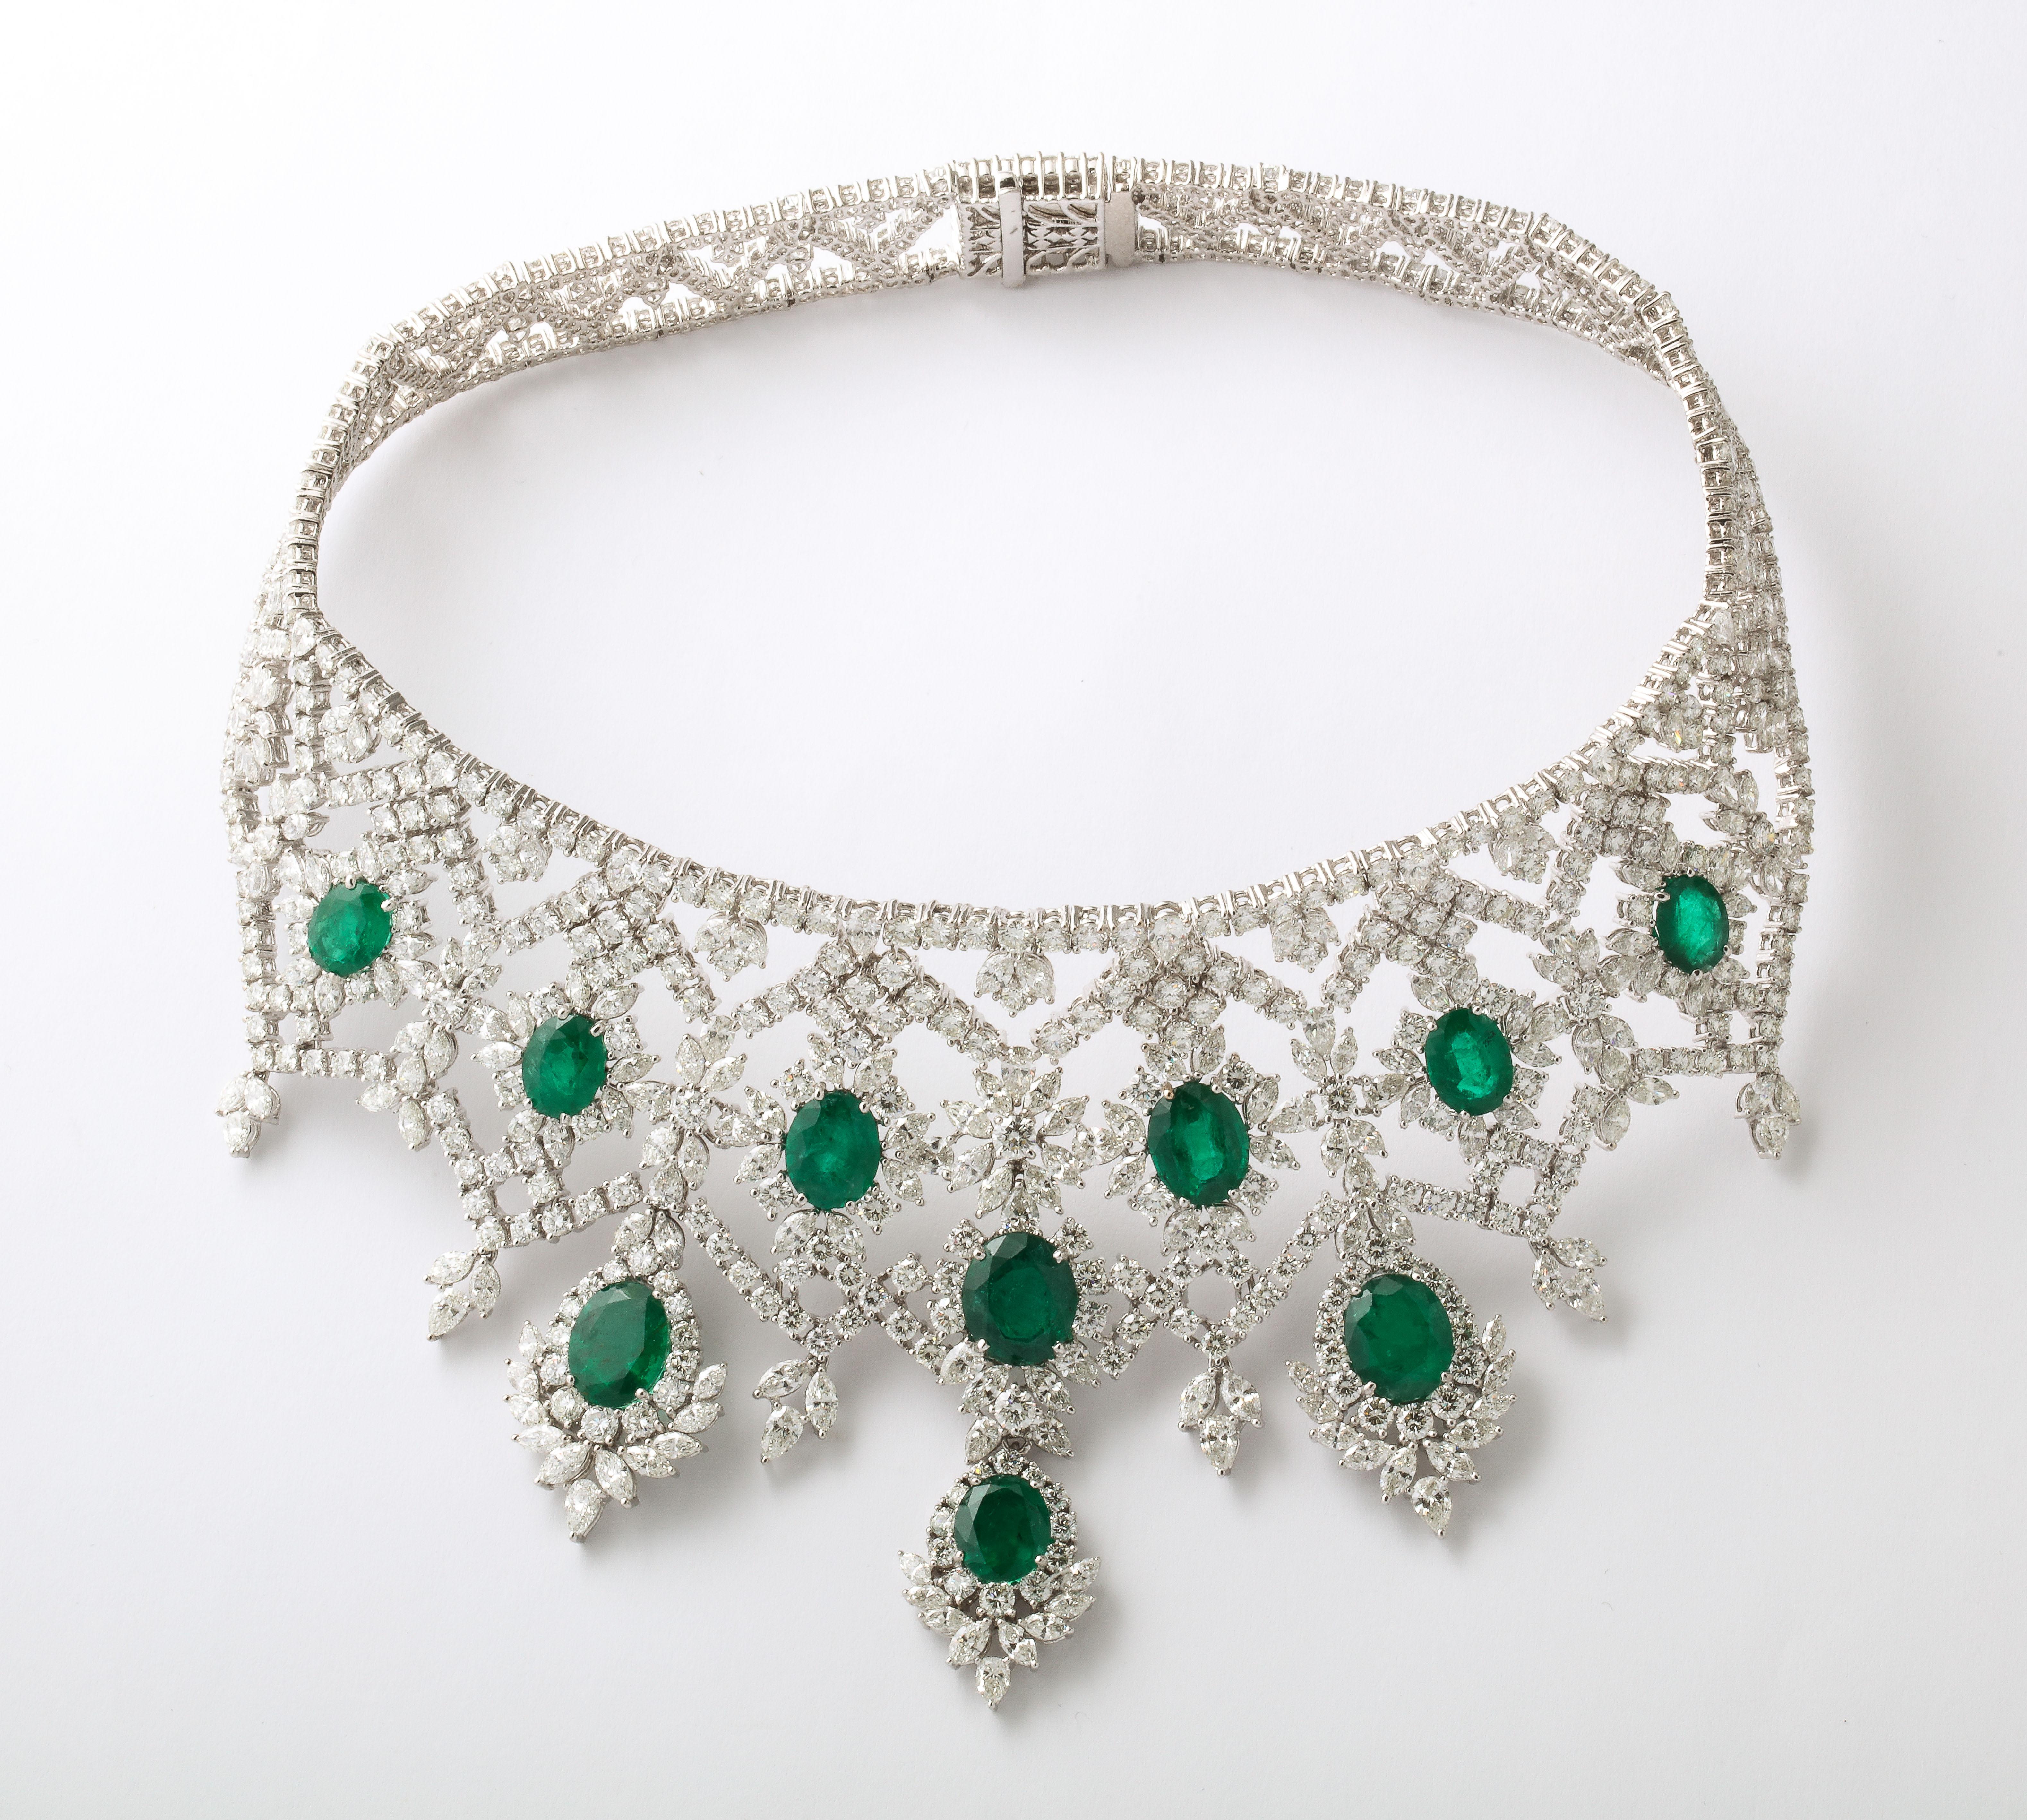 
A MASTERPIECE!

34.80 carats of certified Fine “Intense Green” Emeralds.

66.08 carats of white round, pear and marquise cut diamonds. 

Set in 18k white gold

Fits 16-17 inch neck. The length can easily be adjusted. 

Certified by Christian